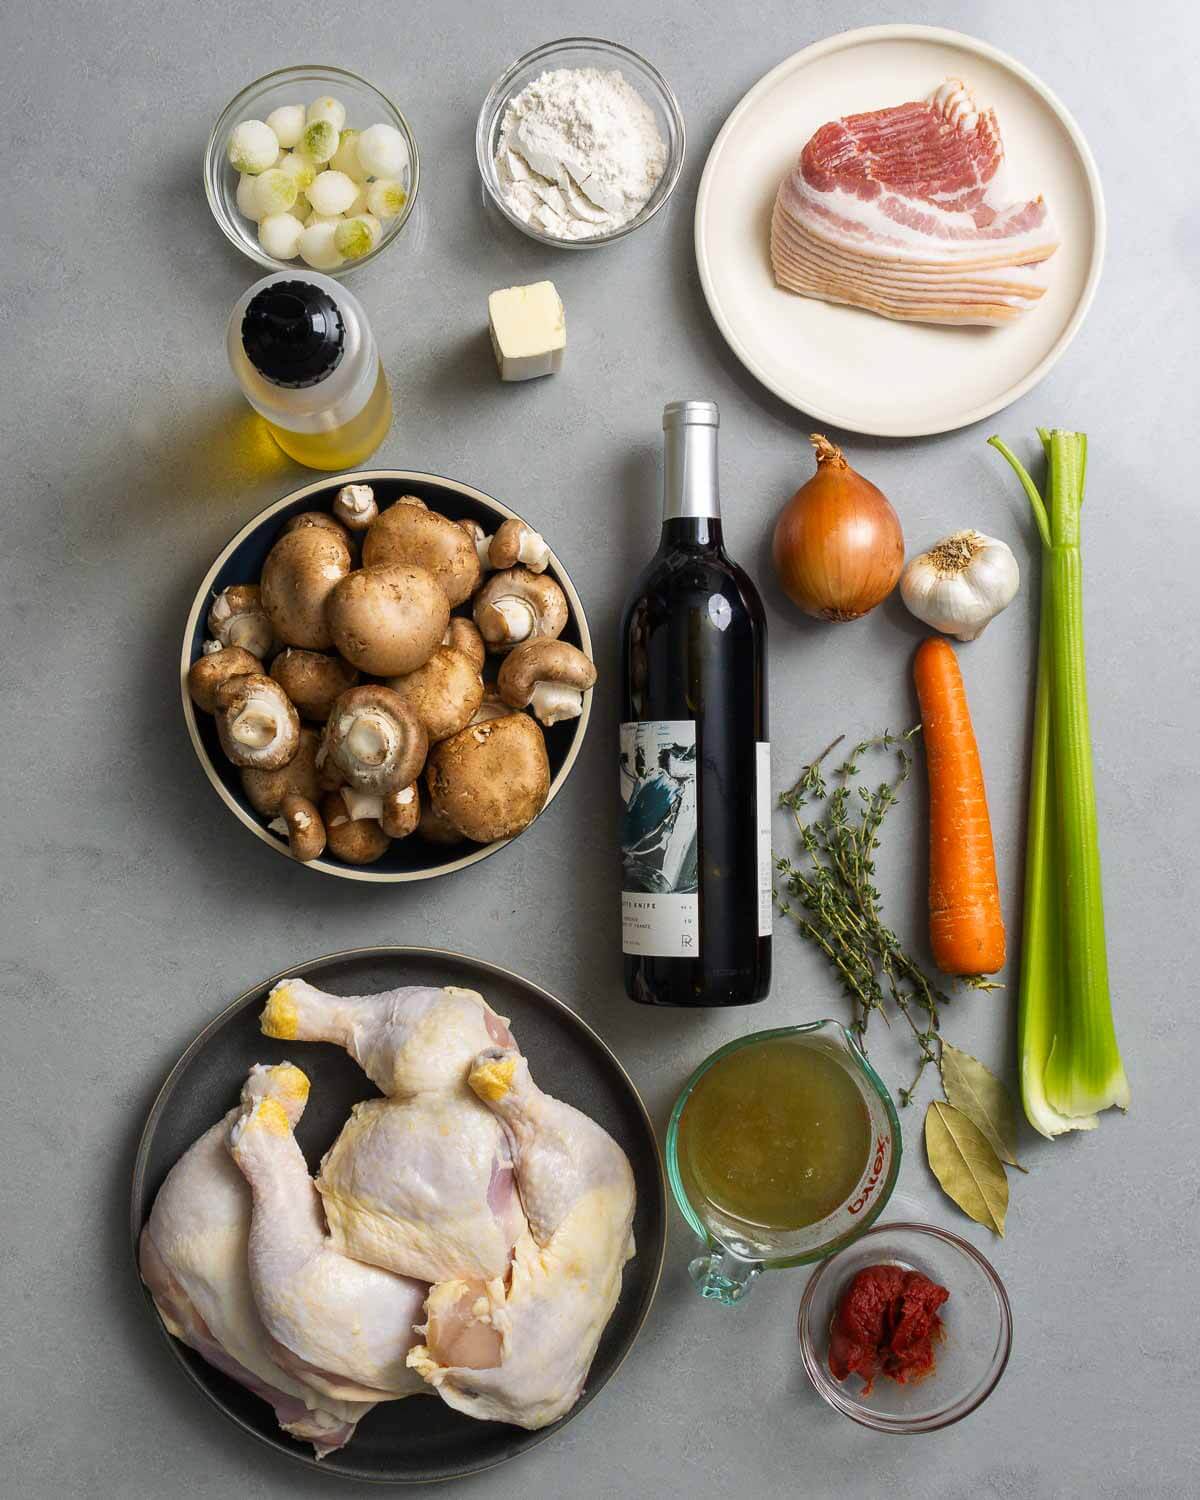 Ingredients shown: pearl onions, olive oil, flour, butter, bacon, mushrooms, red wine, vegetables, chicken, chicken stock, tomato paste, and herbs.